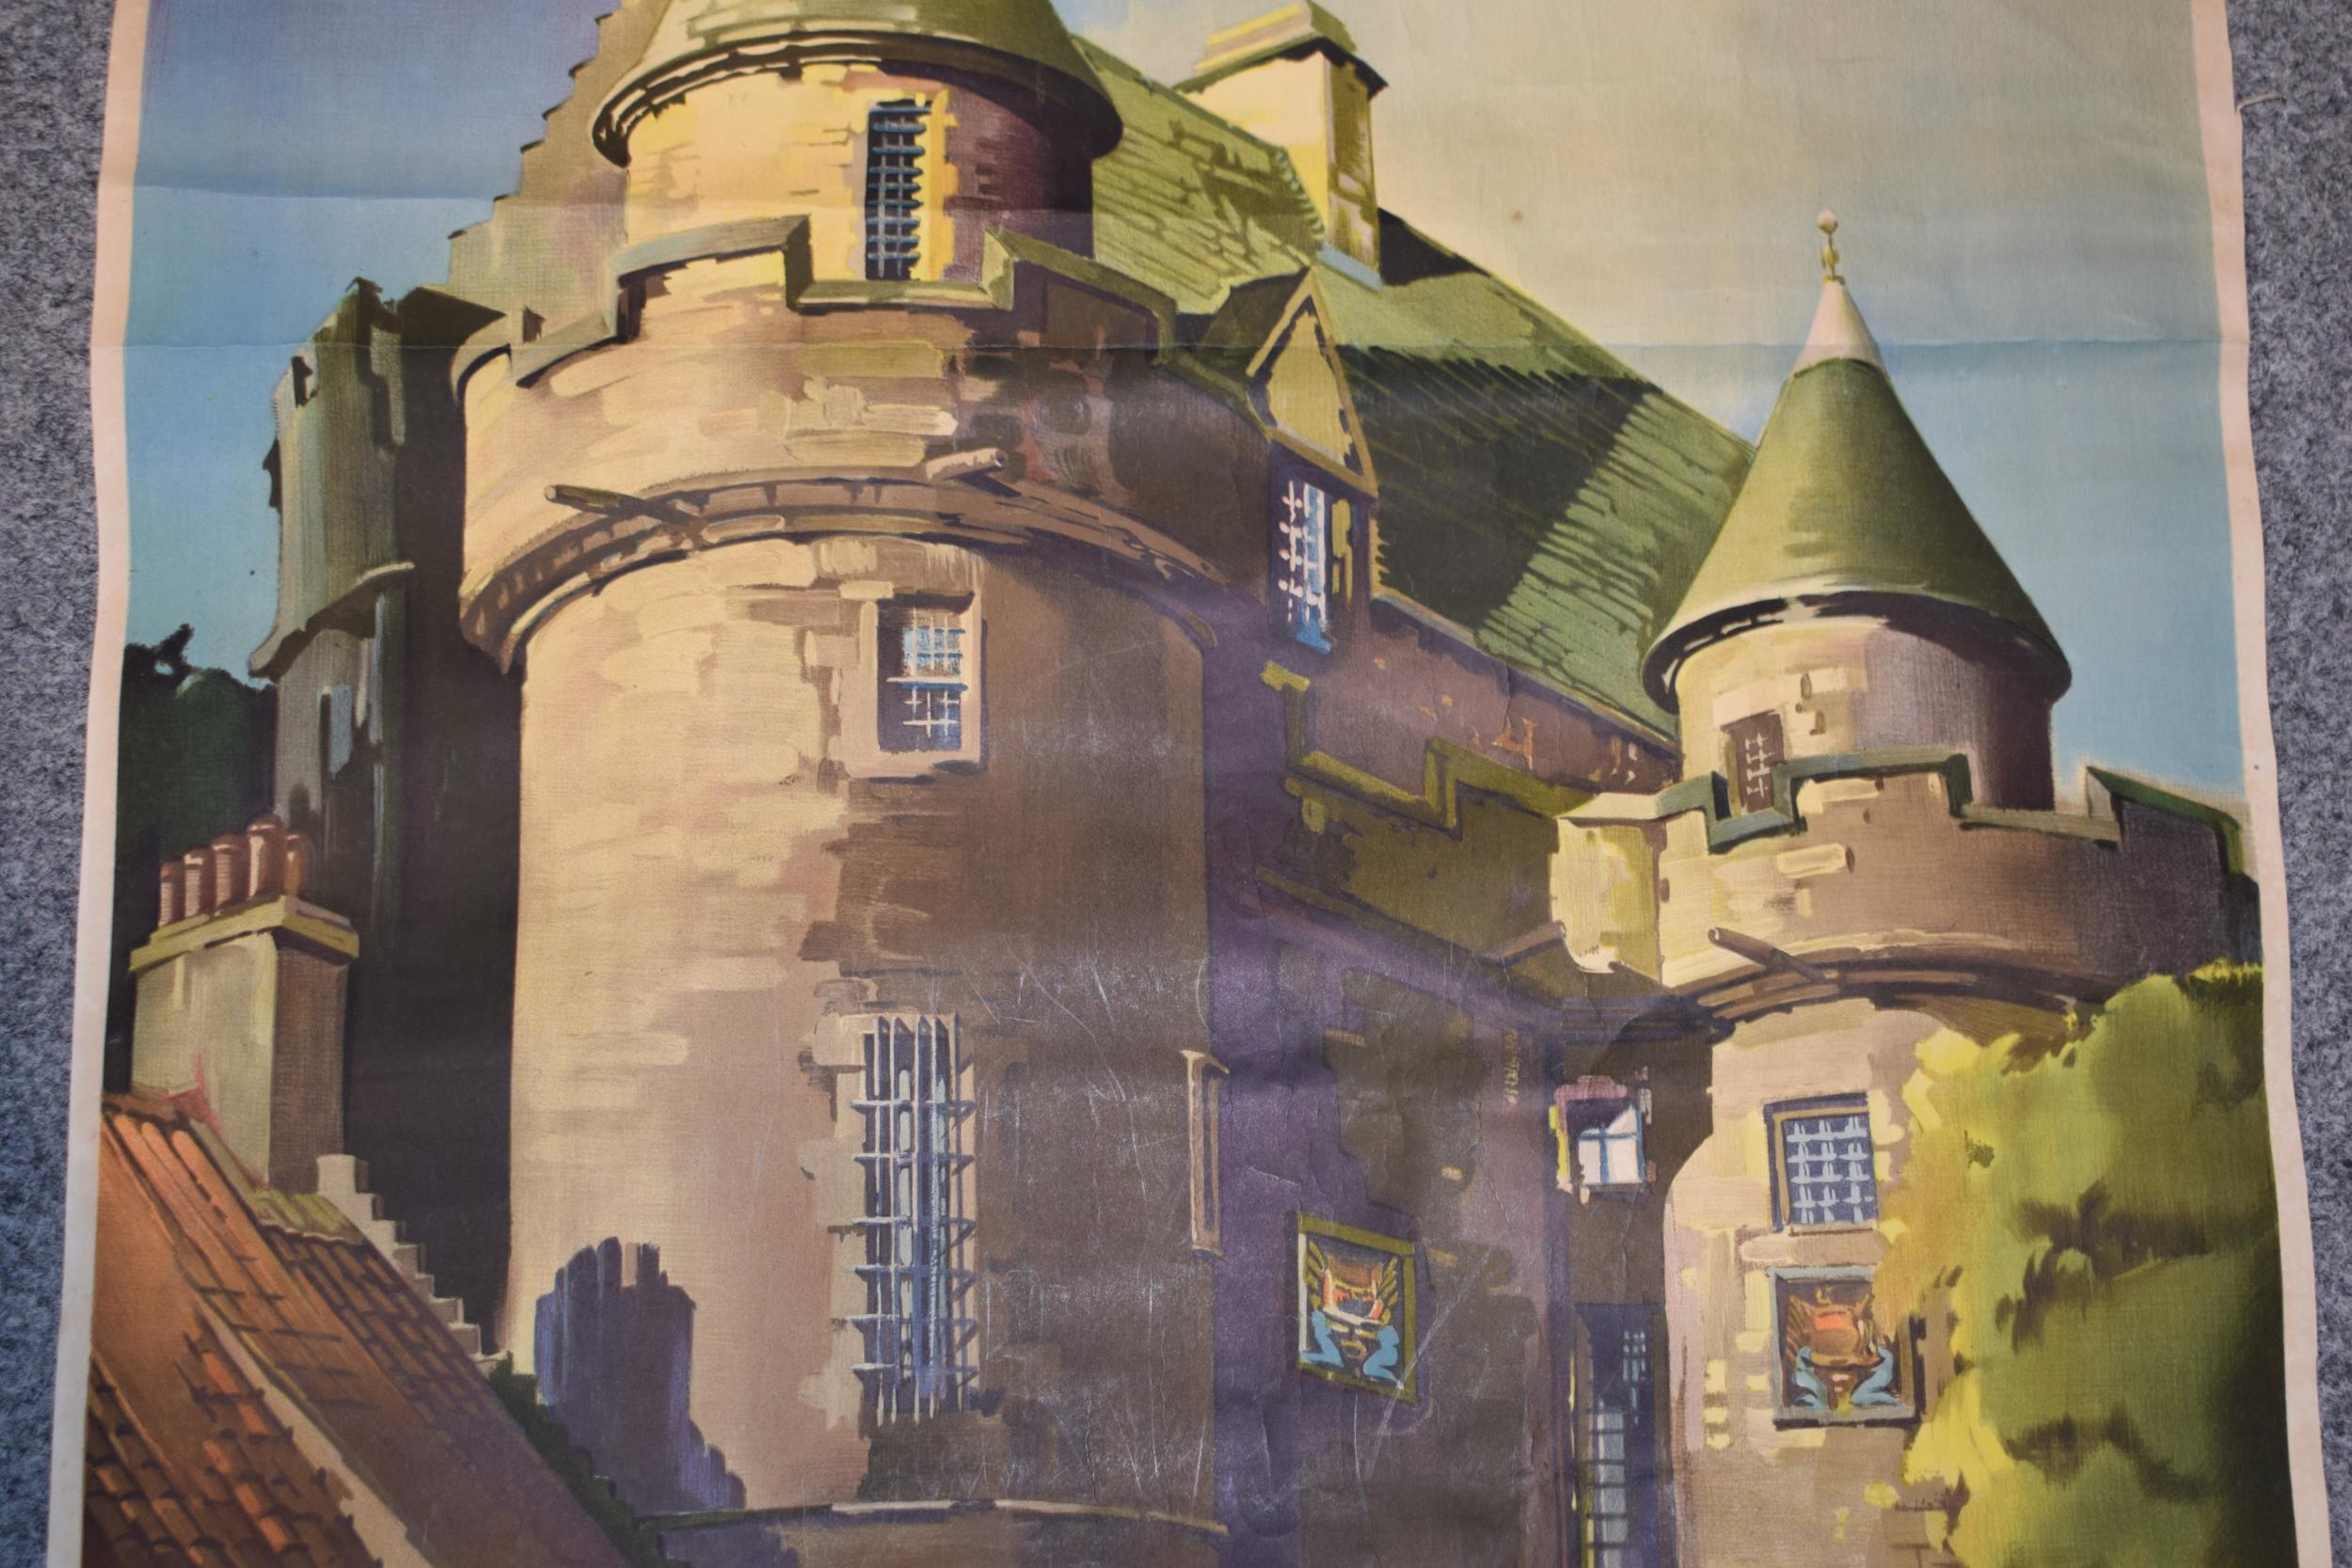 'British Rail' Railway poster 'Falkland Palace' lithograph printed by Stafford & Co, Nottingham. - Image 4 of 8